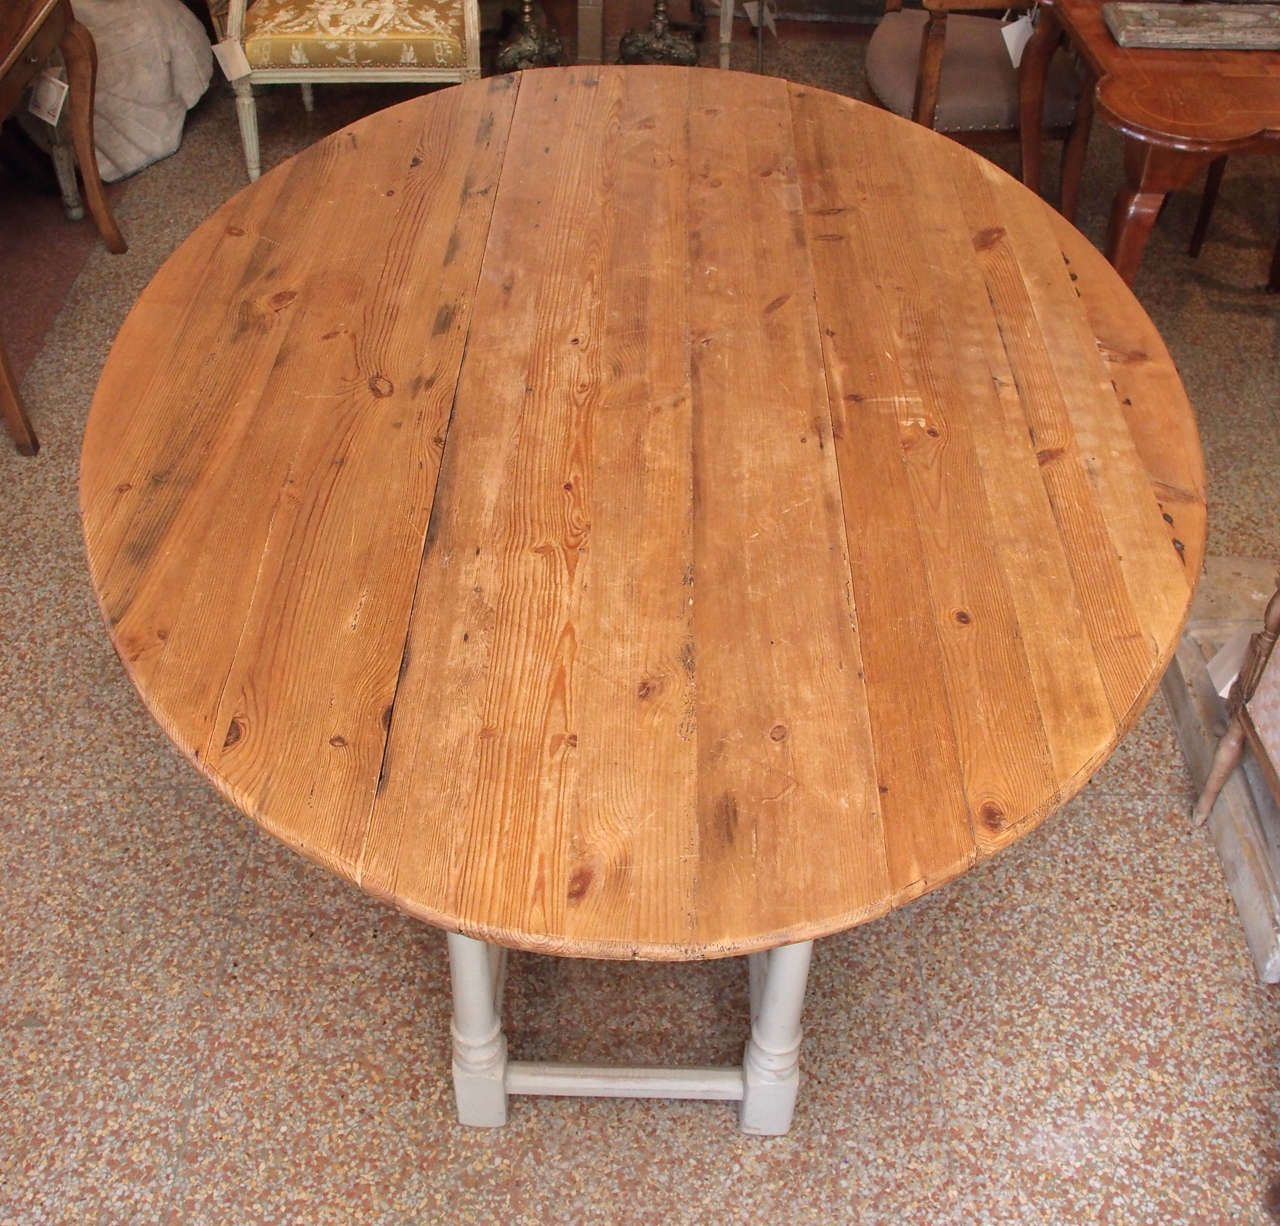 19th Century Painted Drop Leaf Table In Fair Condition For Sale In New Orleans, LA